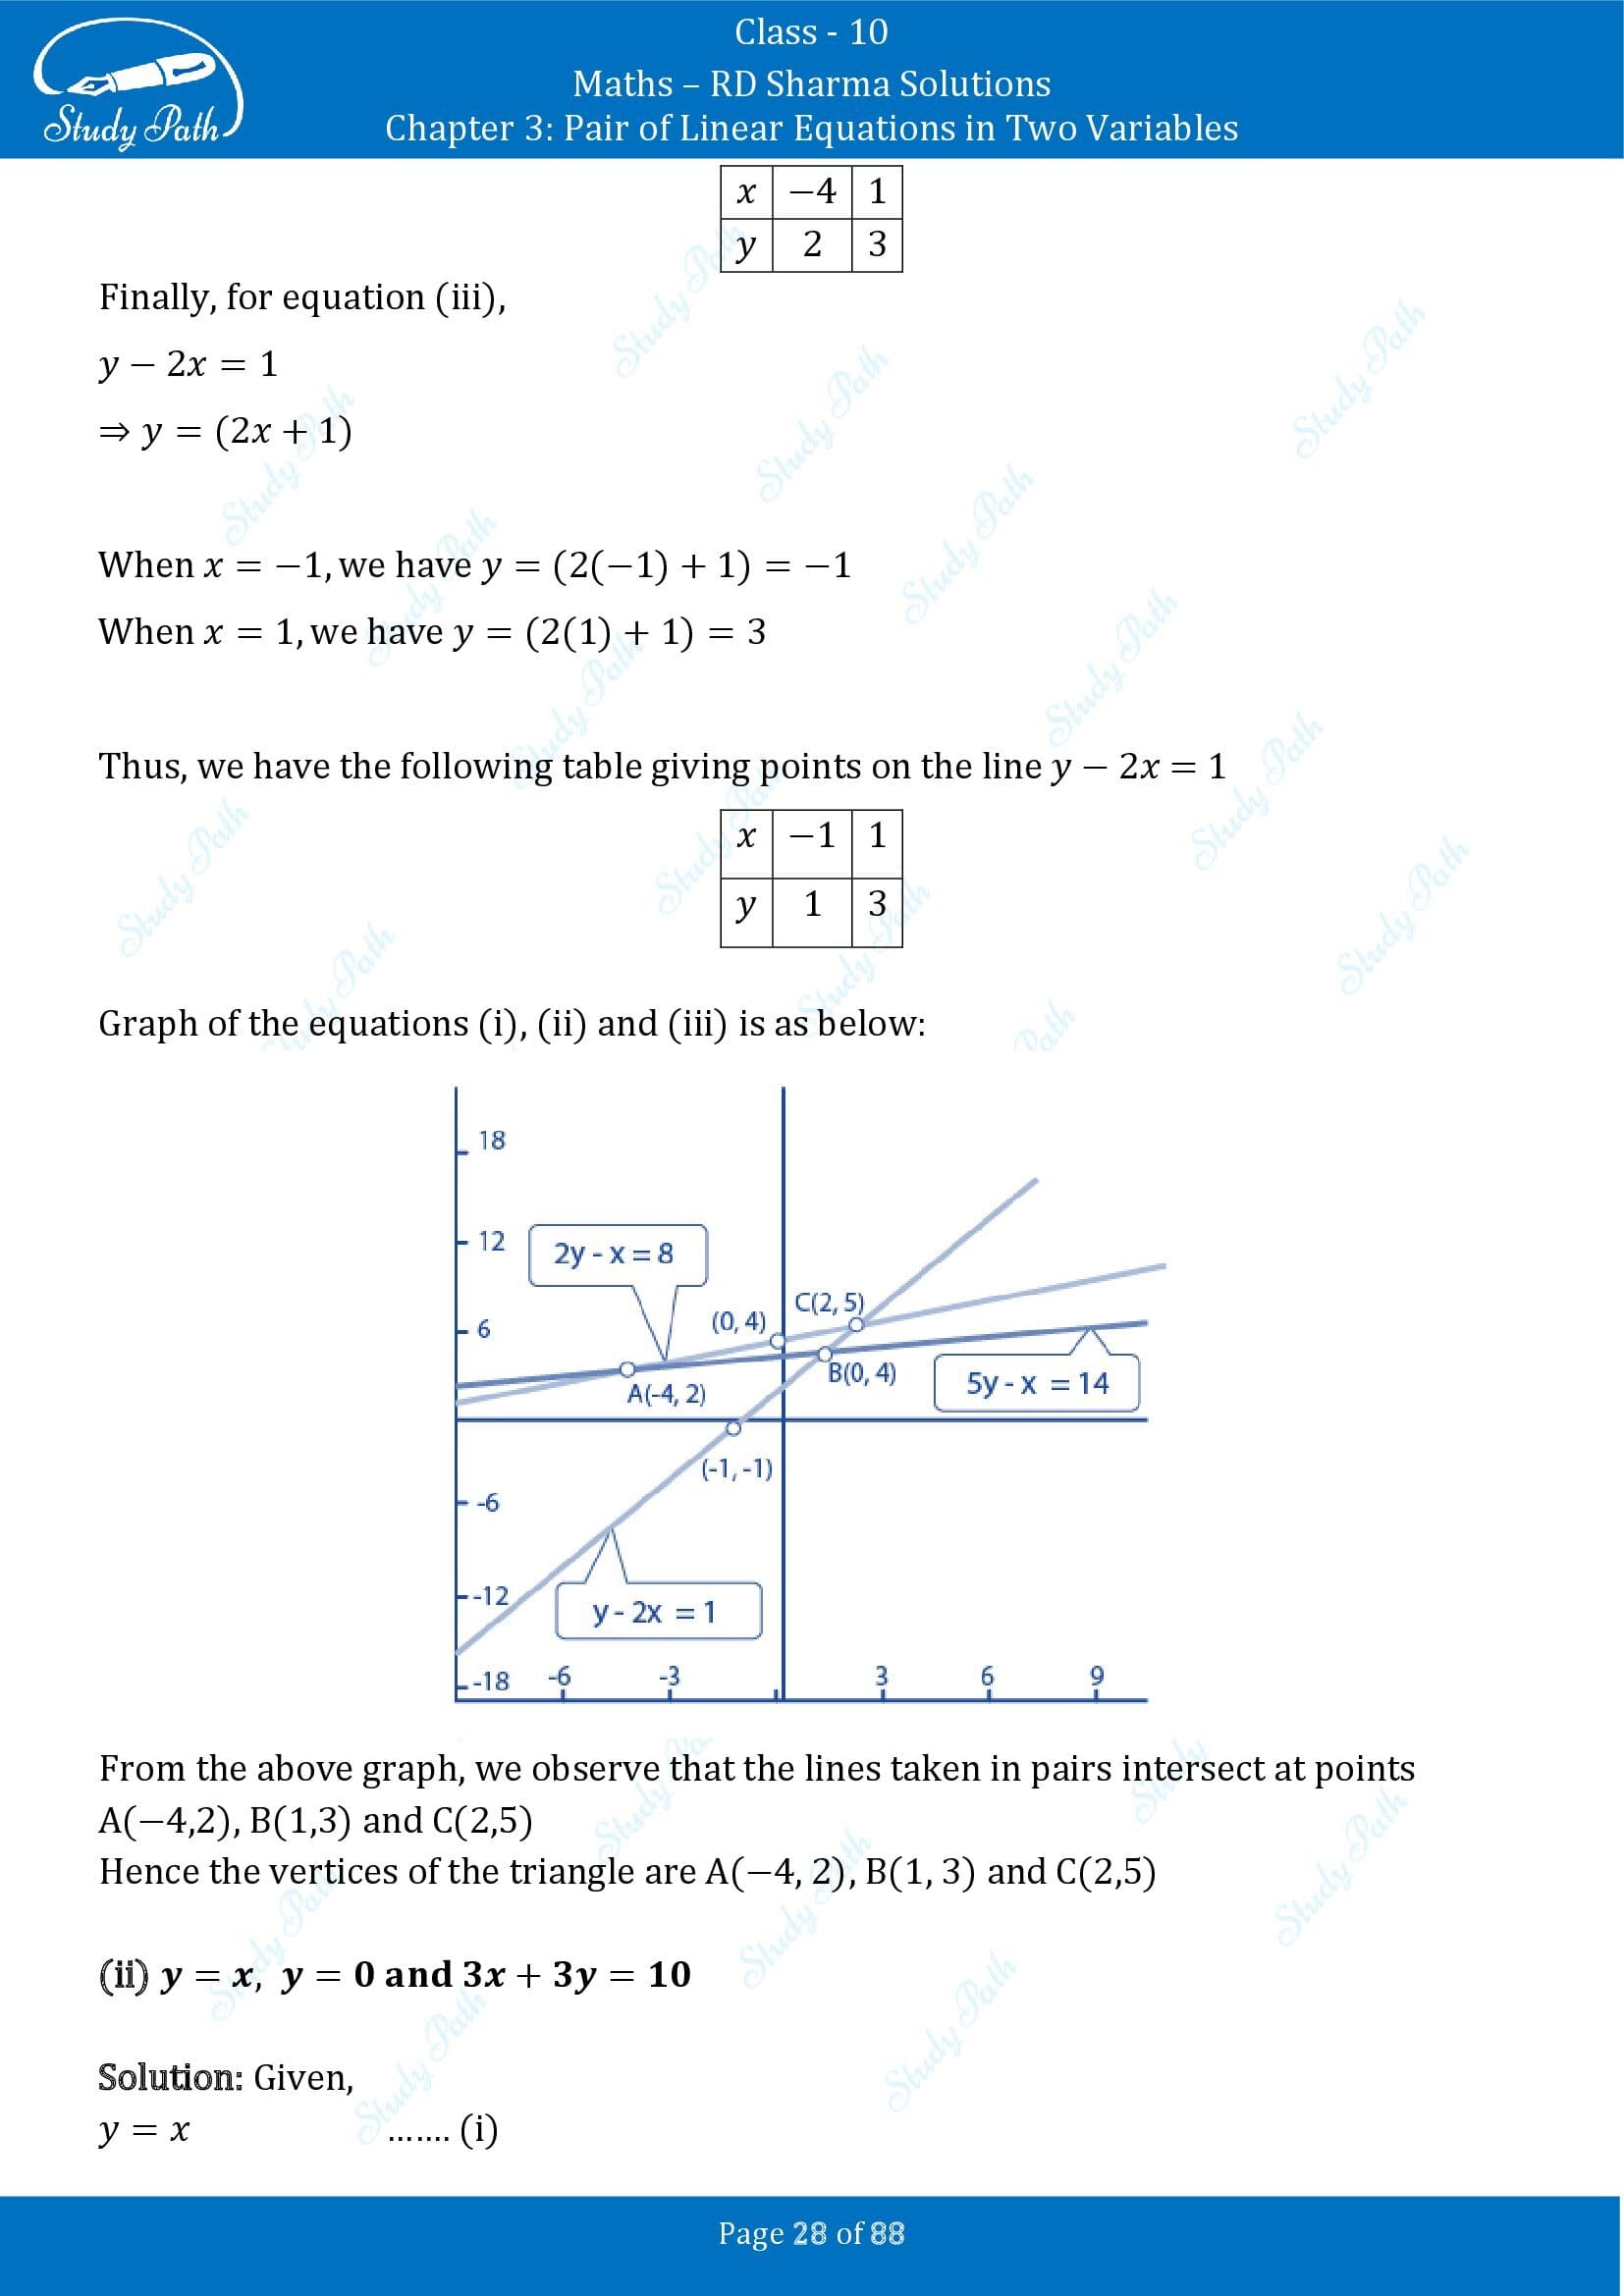 RD Sharma Solutions Class 10 Chapter 3 Pair of Linear Equations in Two Variables Exercise 3.2 00028